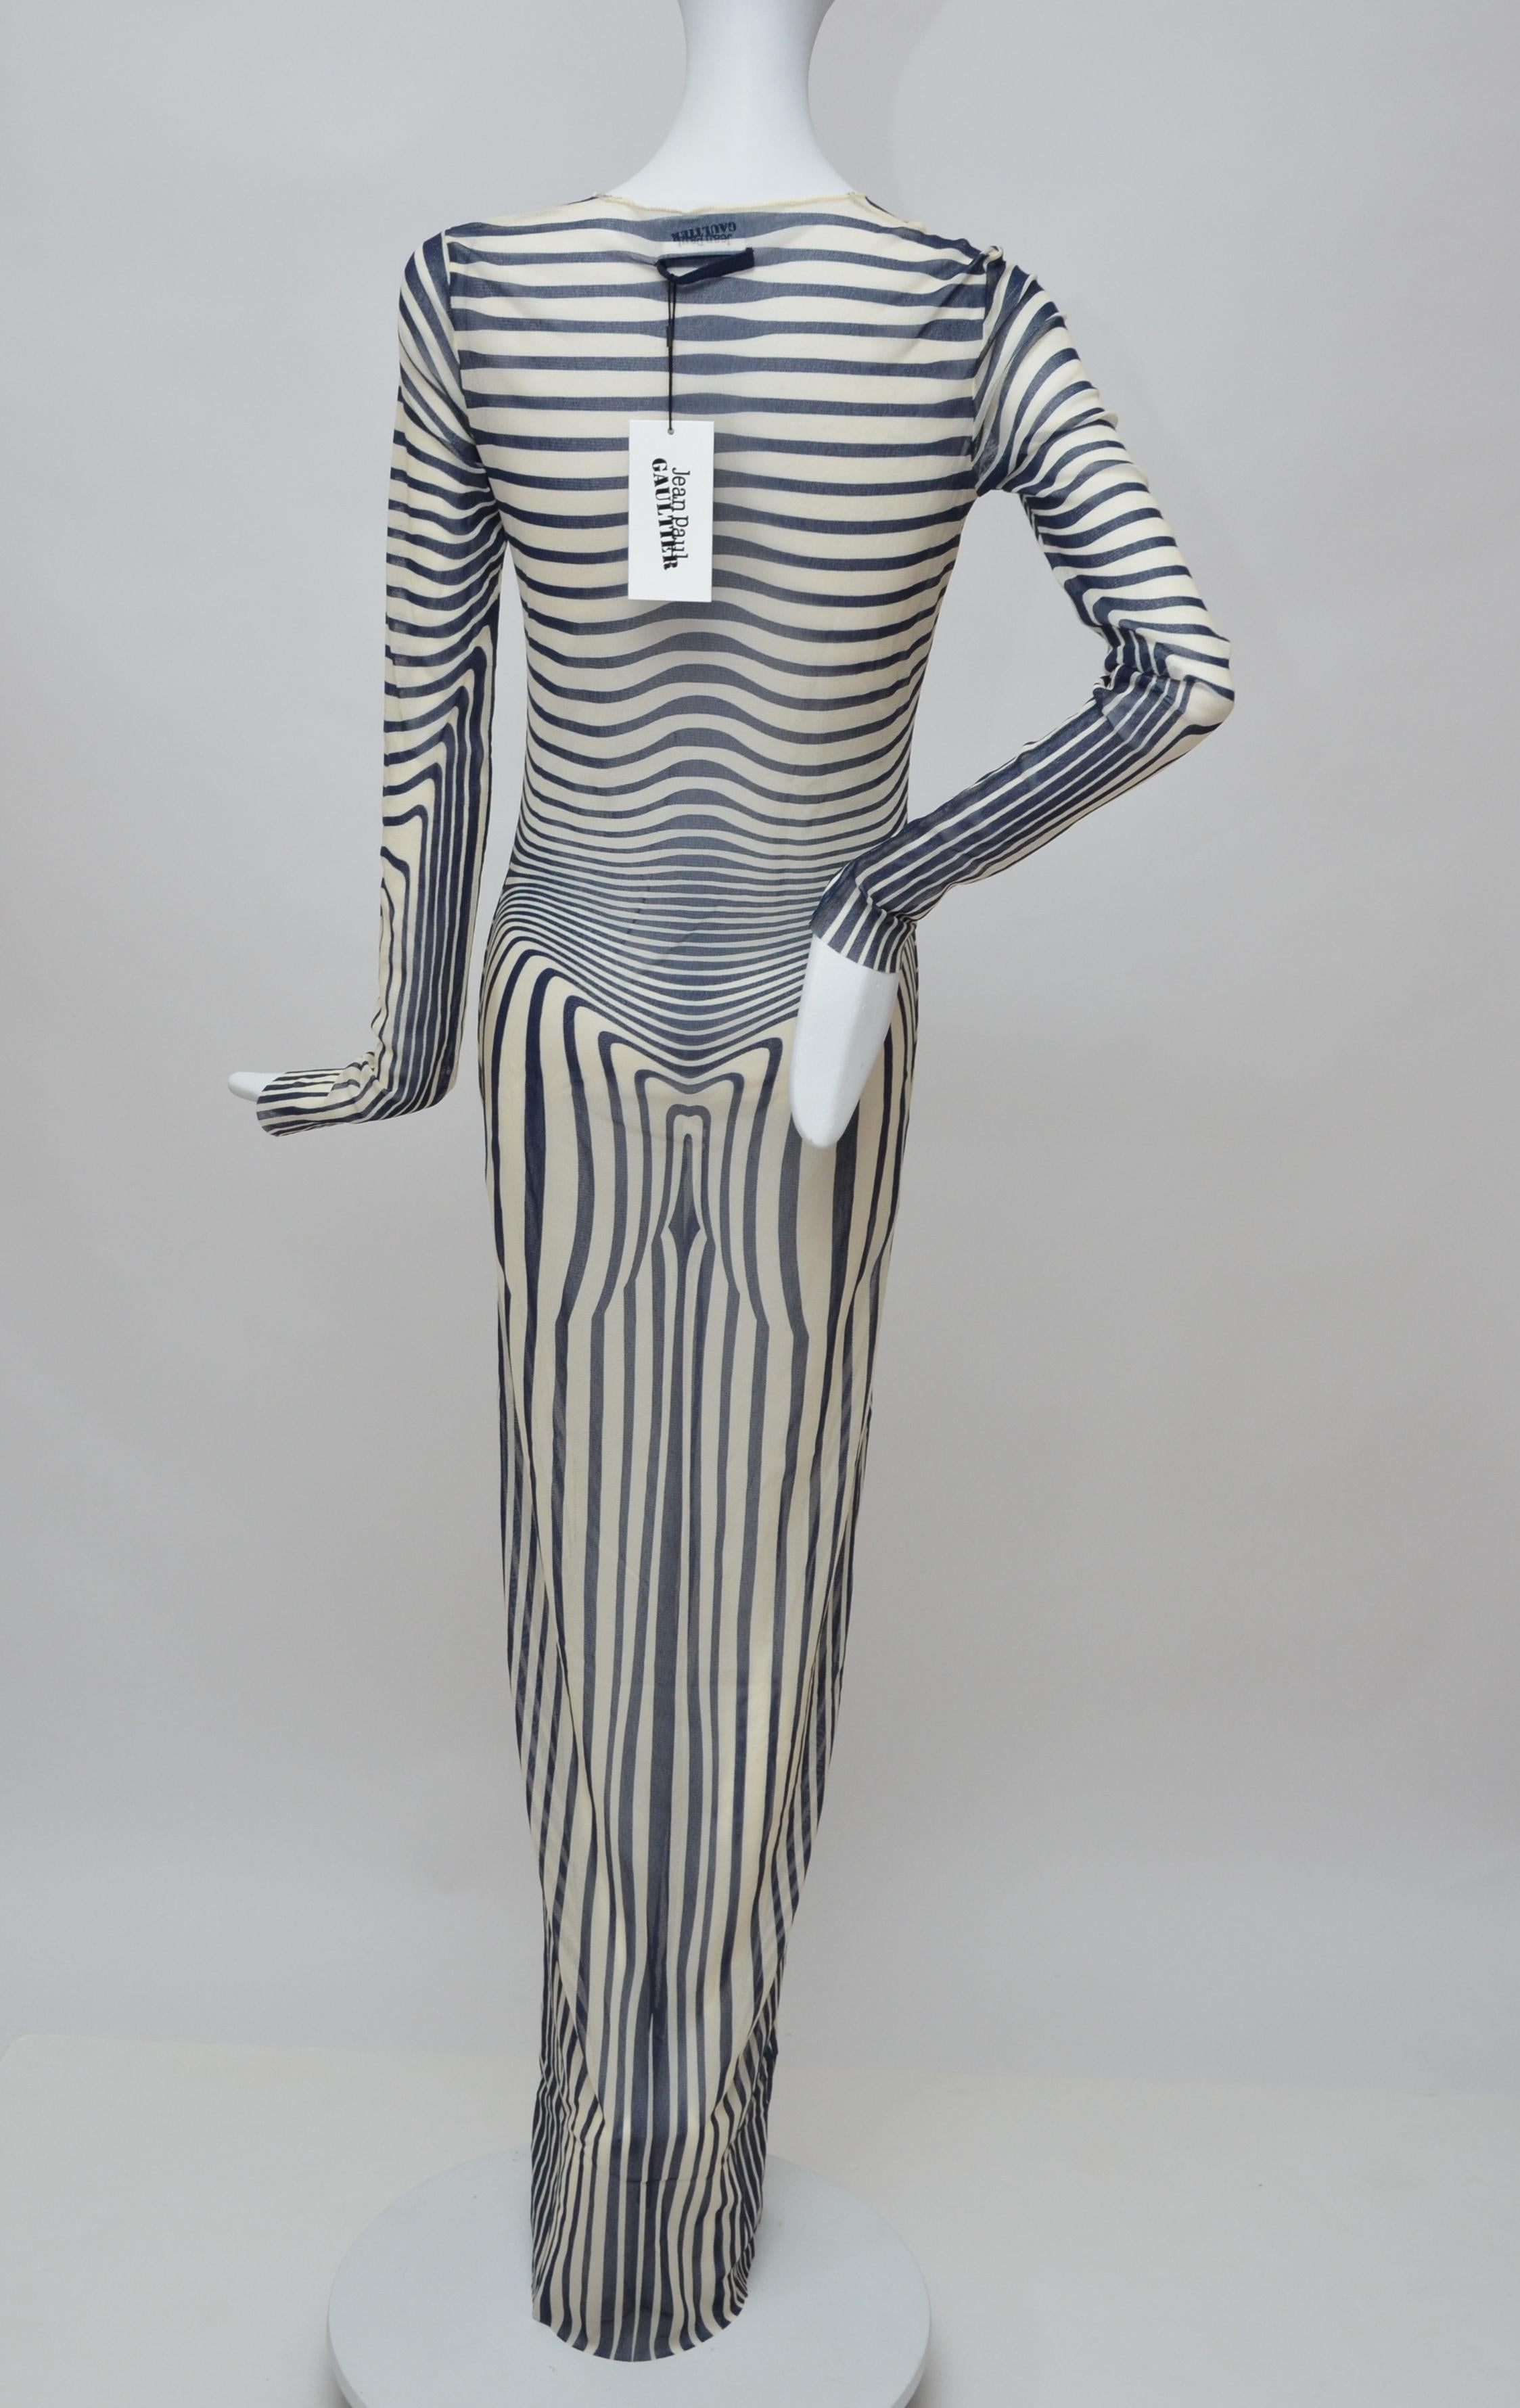 Dress is from Jean Paul Gaultier’s famous sheer, tattoo print  ready to wear collection: Les Marins by Jean Paul Gaultier.
This collection was presented  by five different design teams and their various aesthetics but  the collection itself is